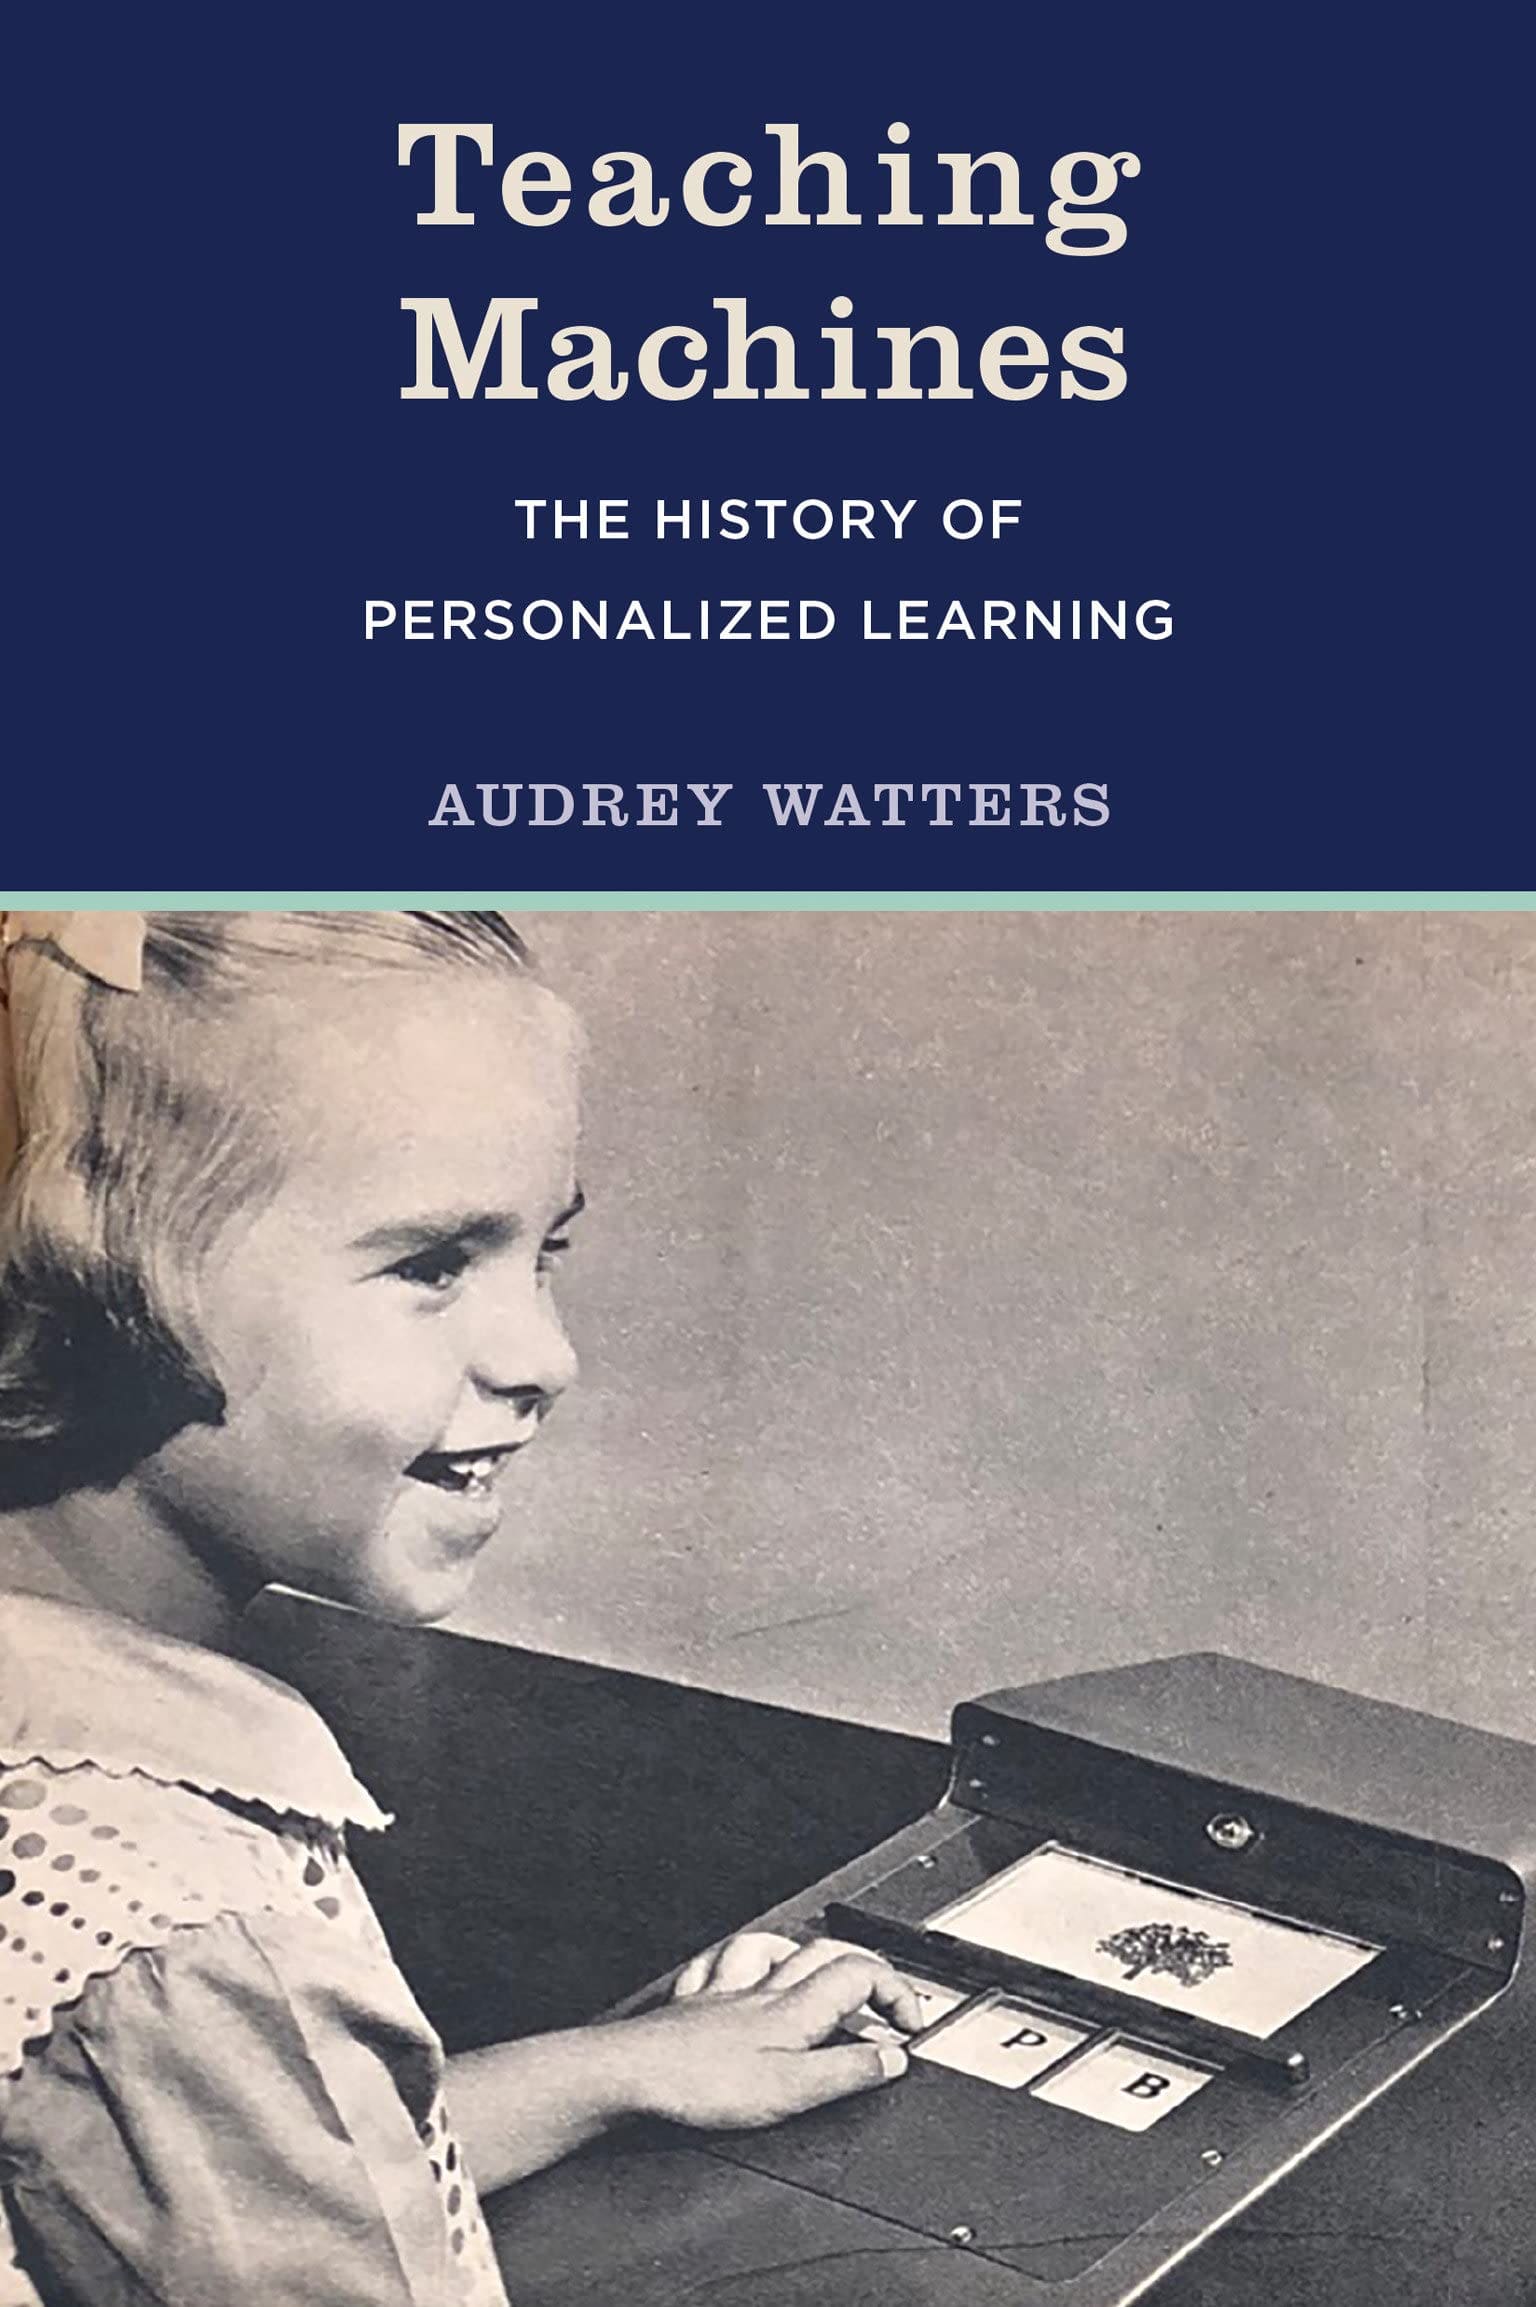 Teaching Machines: The History of Personalized Learning / By Audrey Watters